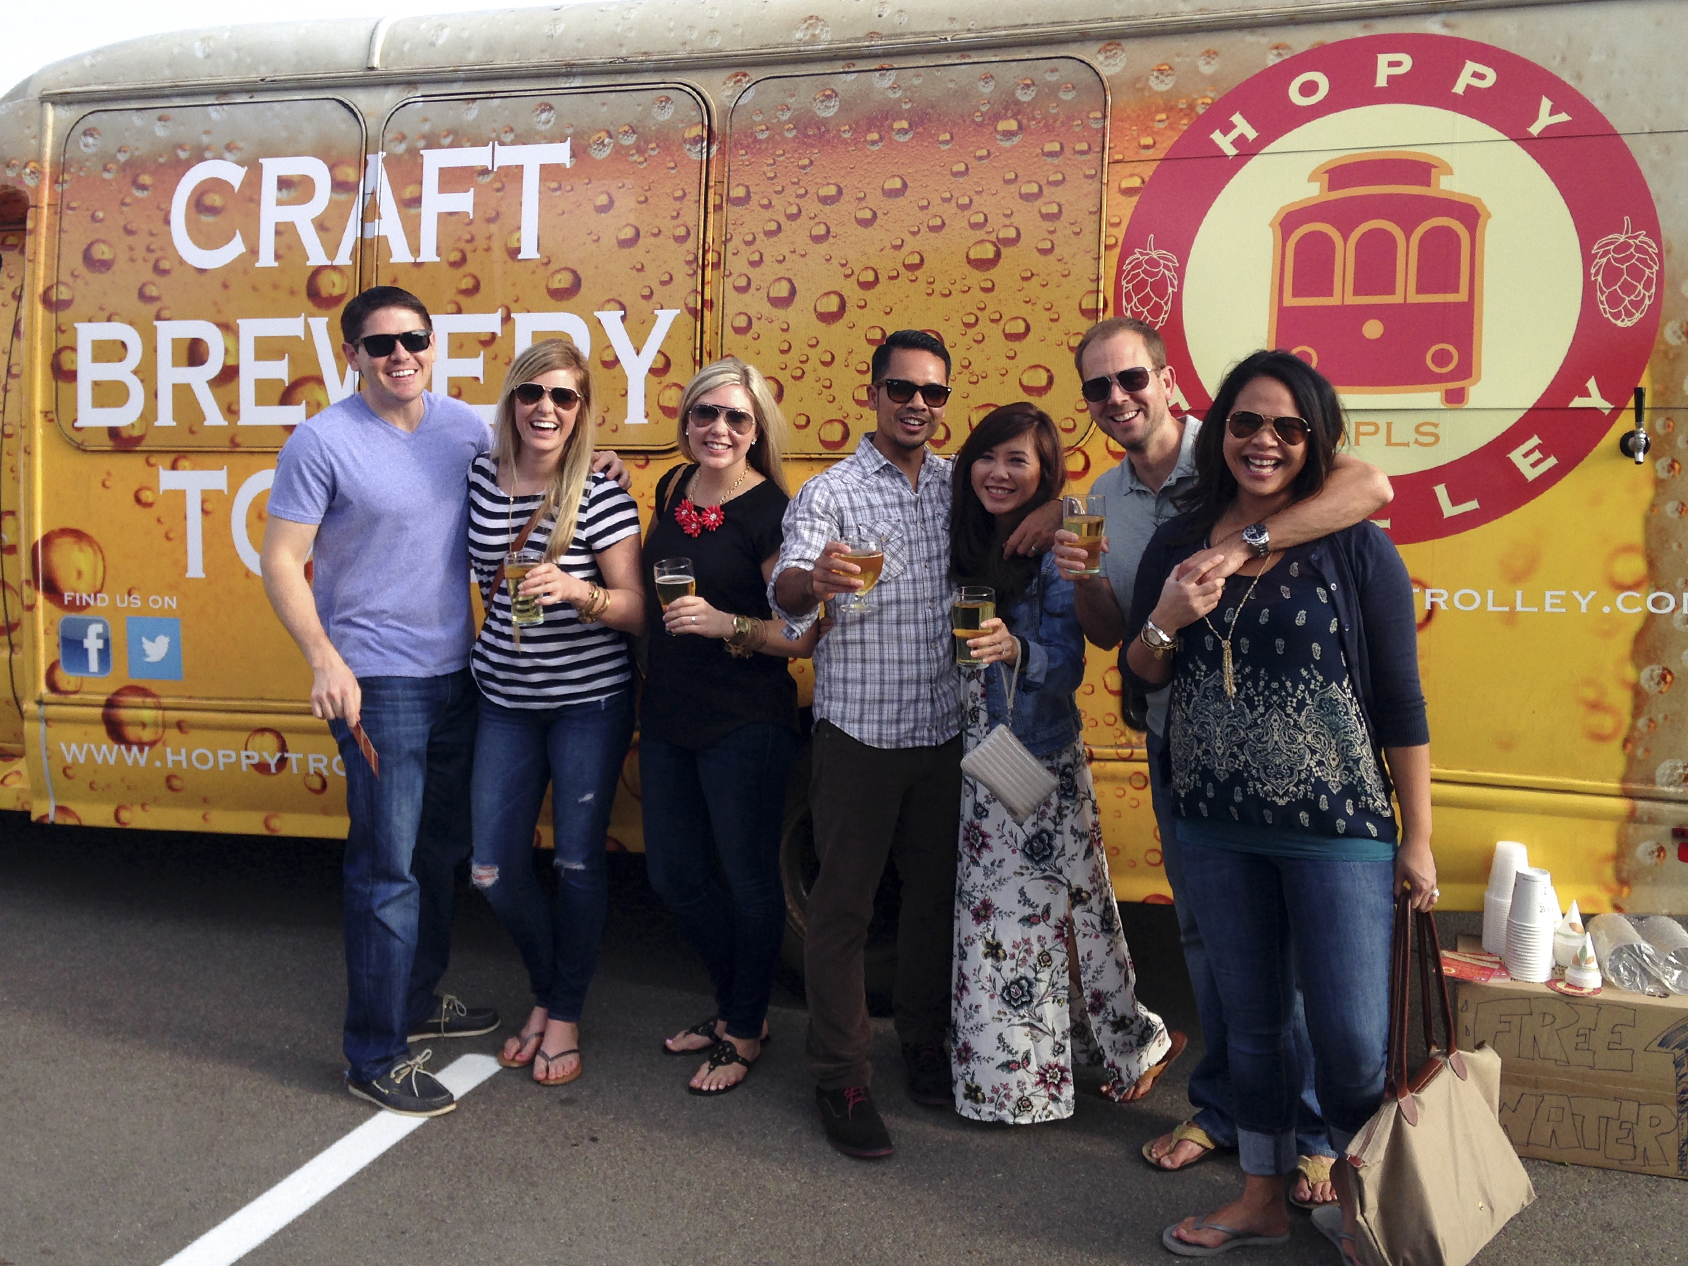 Craft brewery tour bus and participants